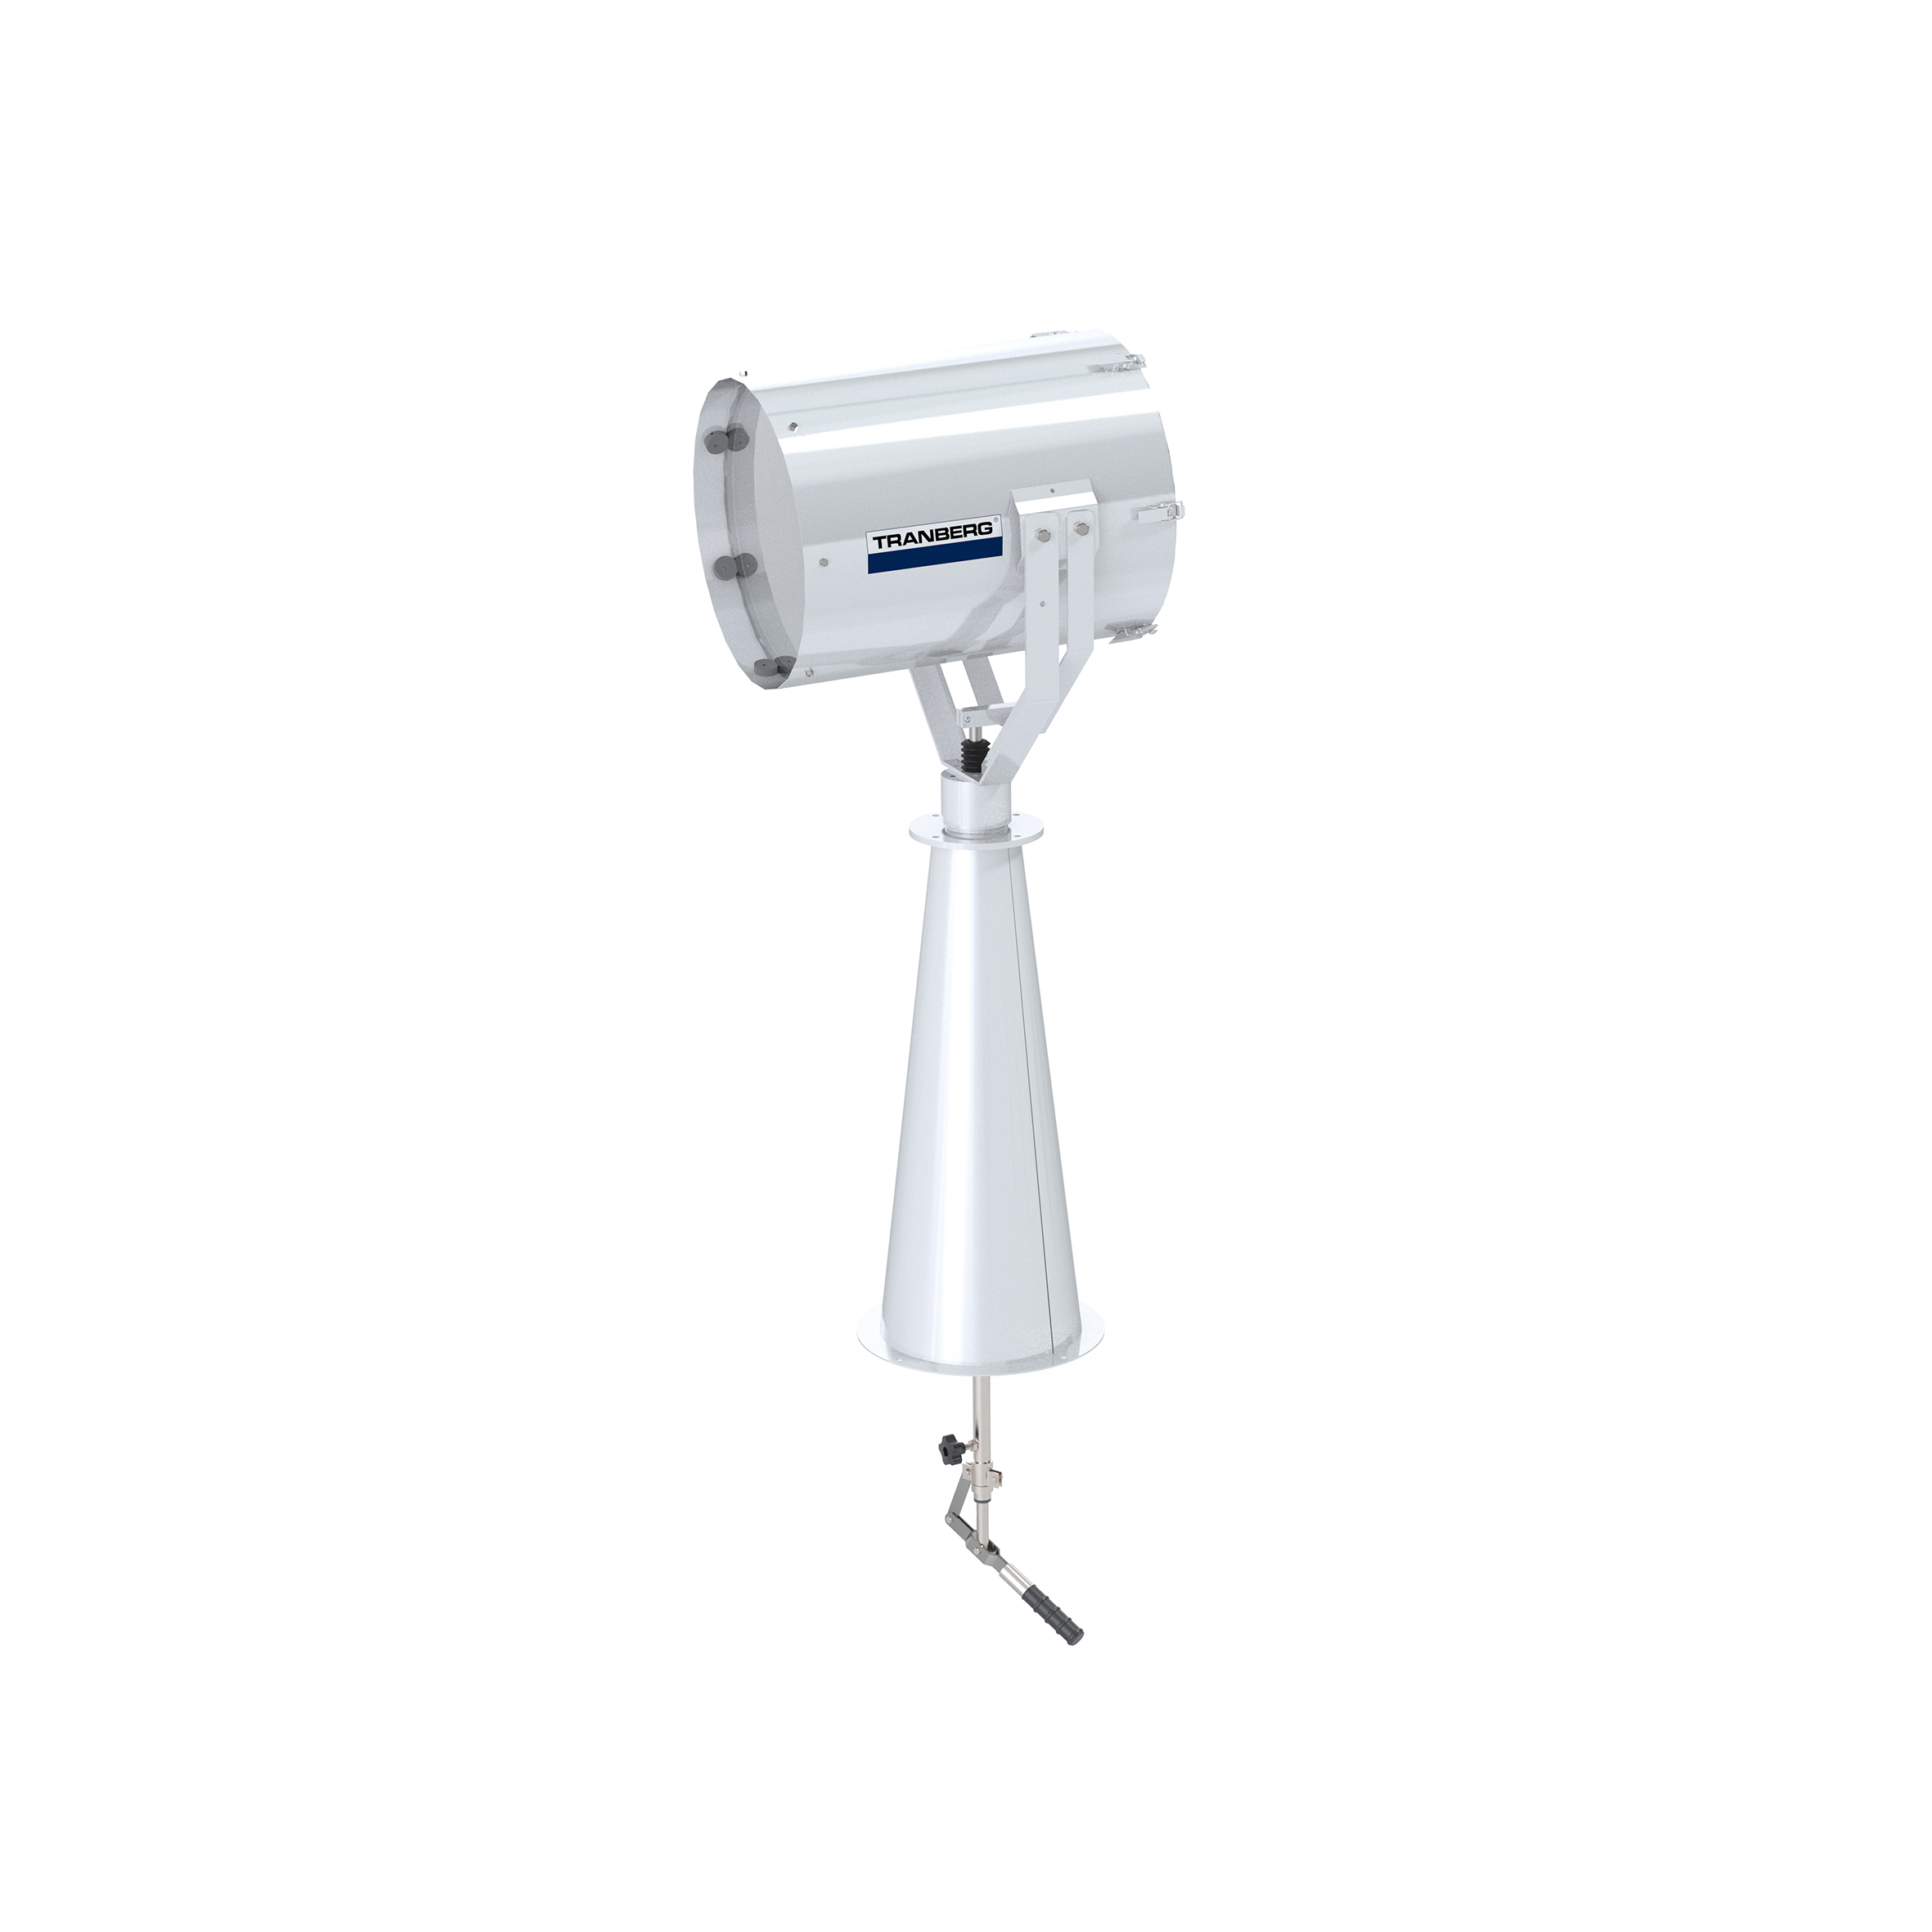 TEF 2630 Searchlight: Halogen 250W bulb incl, 24V, Bridge Controlled, Stainless Steel, W/300 mm pede photo